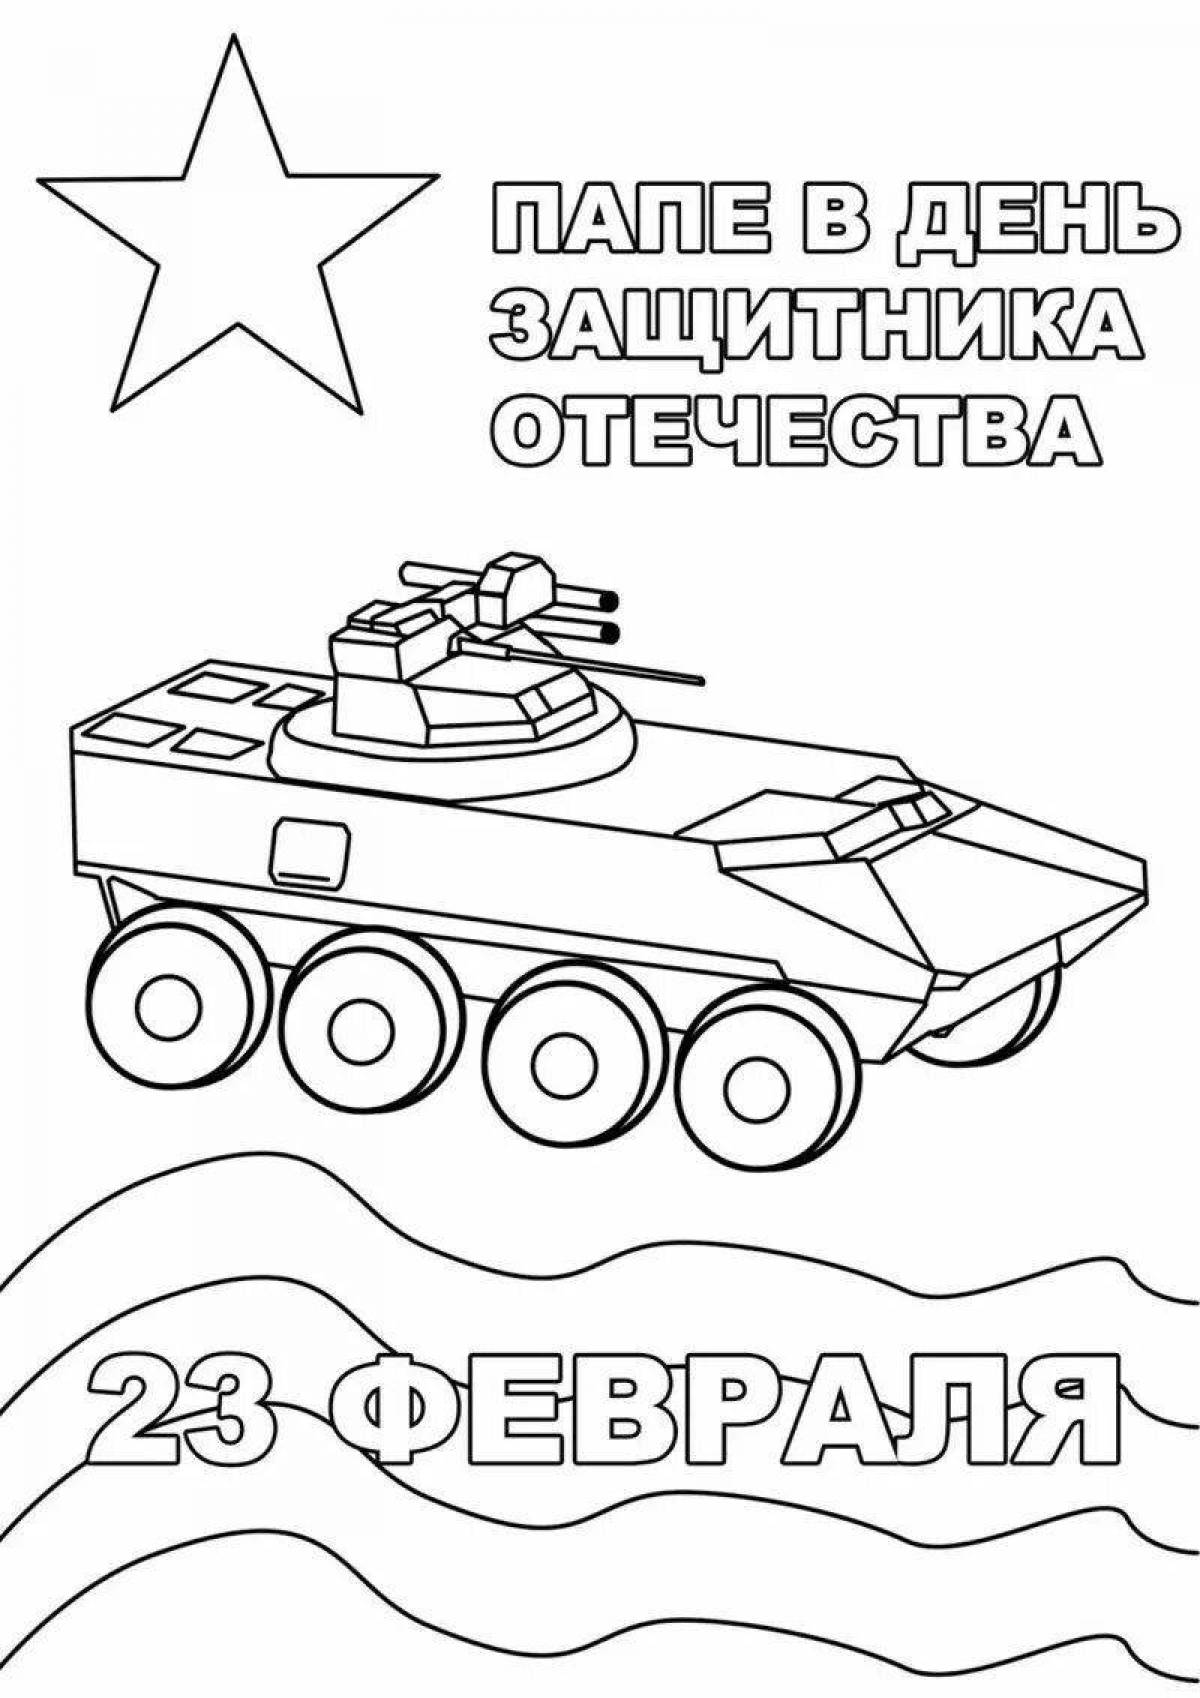 For children February 23 Defender of the Fatherland Day #18